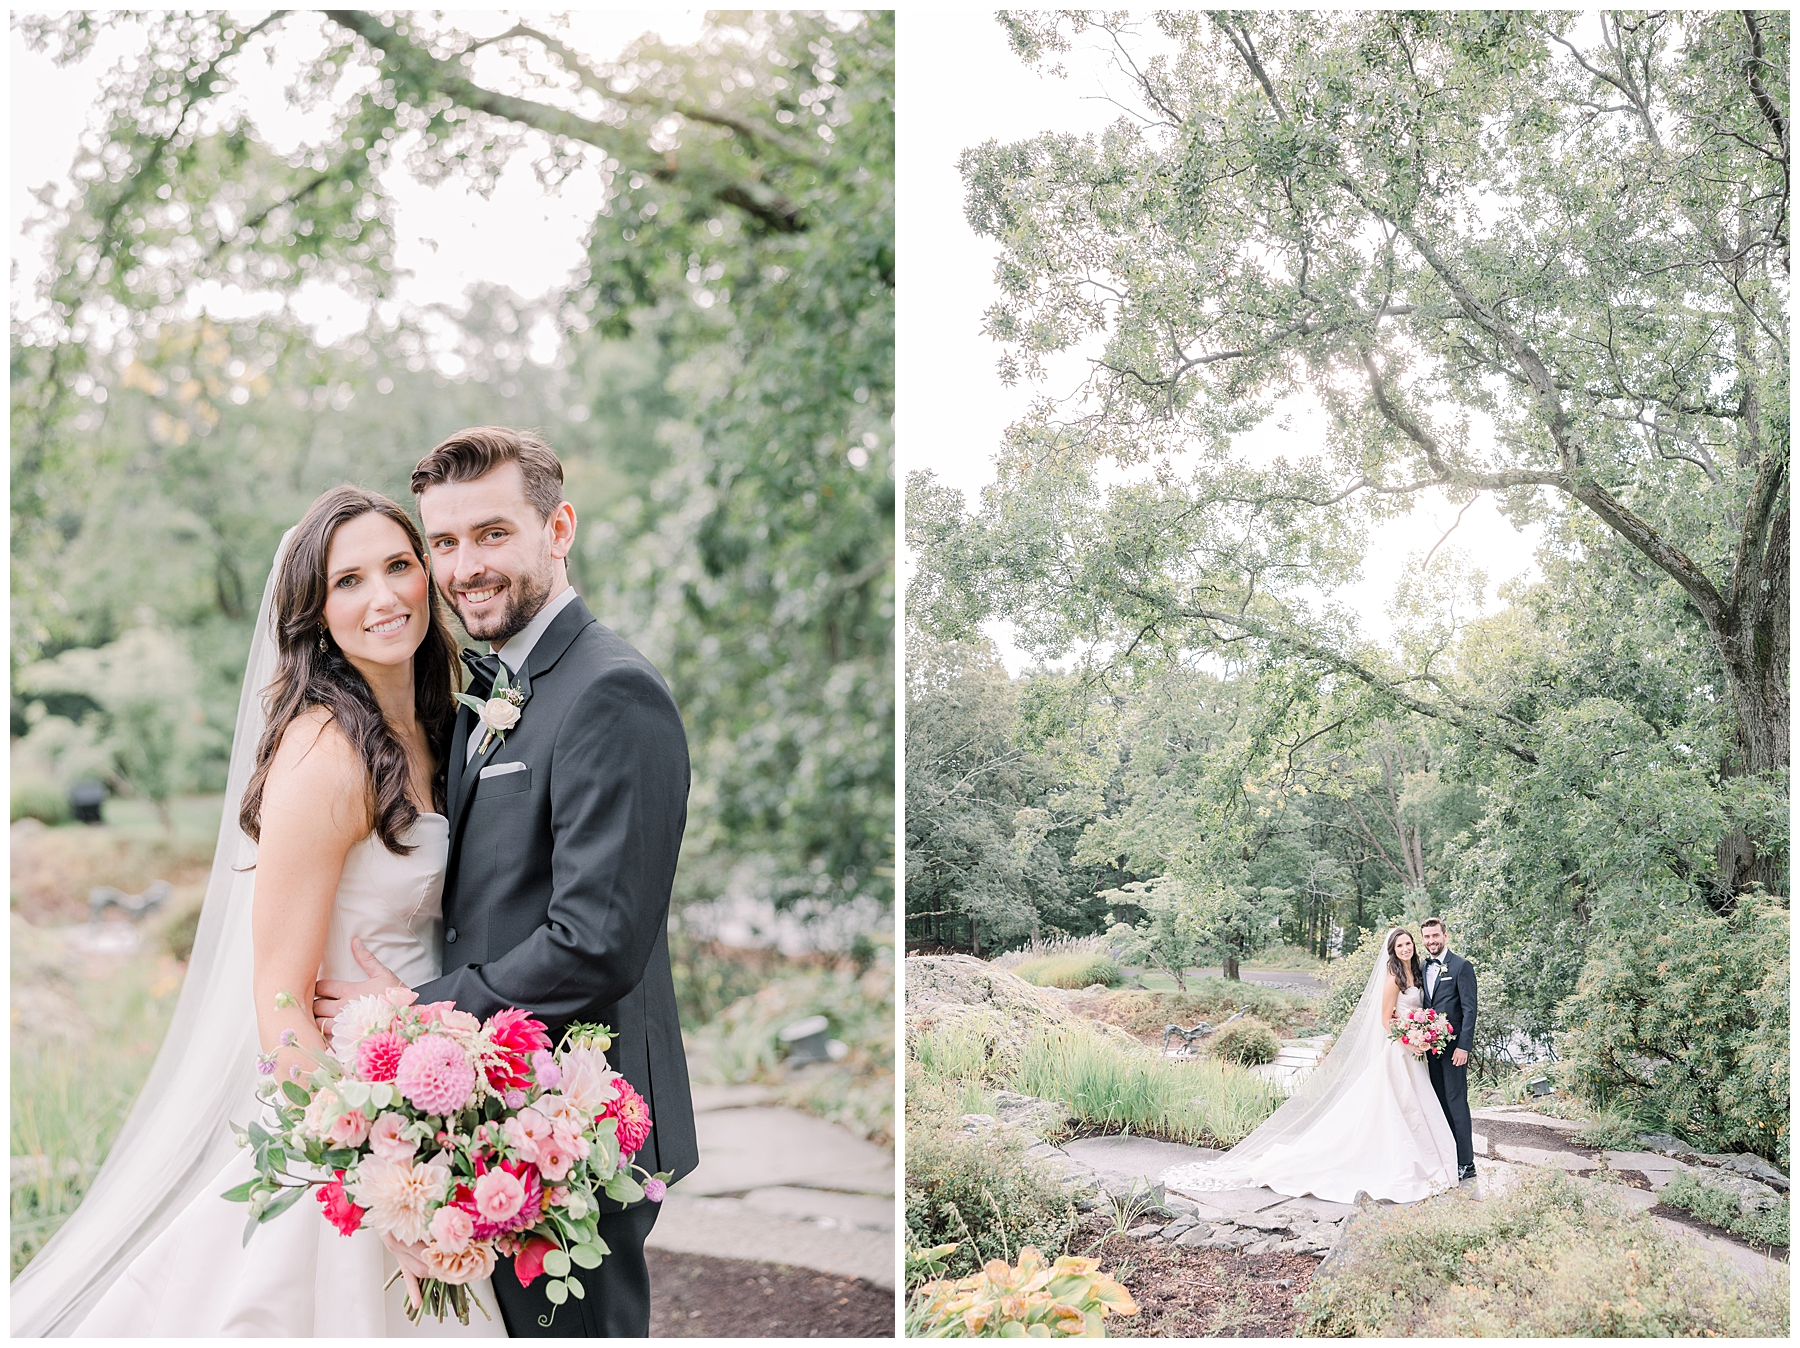 wedding portraits in park setting at DeCordova Sculpture Park and Museum